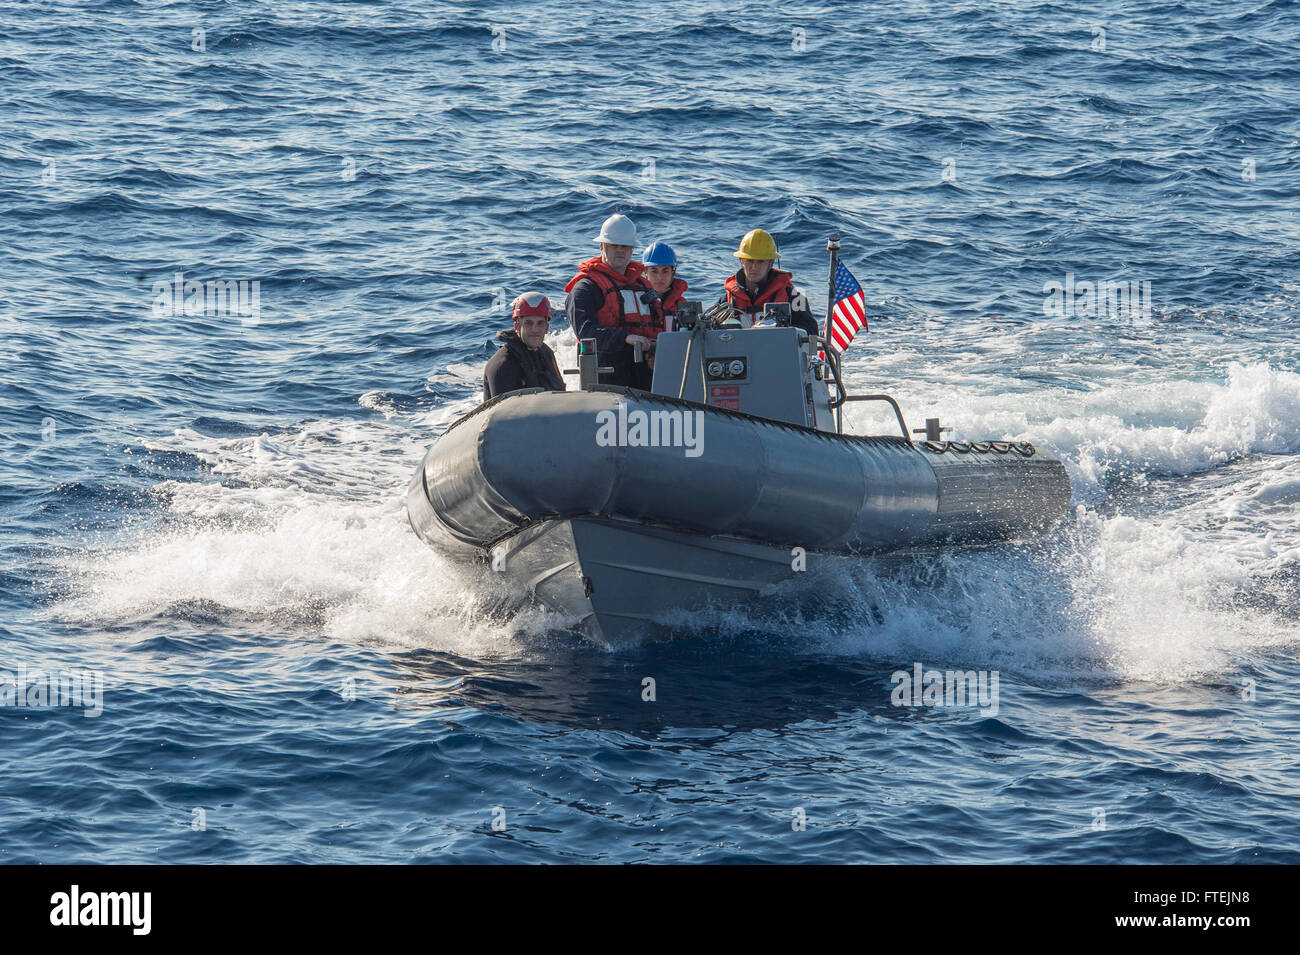 MEDITERRANEAN SEA (Dec. 21, 2014) Boatswain’s Mate 2nd Class Ian Sutton, from Ottawa, Kansas, maneuvers a rigid-hull inflatable boat alongside USS Cole (DDG 67) during a passenger transfer with USNS Kanawha (T-AO 196), Dec. 21, 2014. Cole, an Arleigh Burke-class guided-missile destroyer, and Kanawha, a Henry J. Kaiser-class fleet replenishment oiler, are conducting naval operations in the U.S. 6th Fleet area of operations in support of U.S. national security interests in Europe. Stock Photo